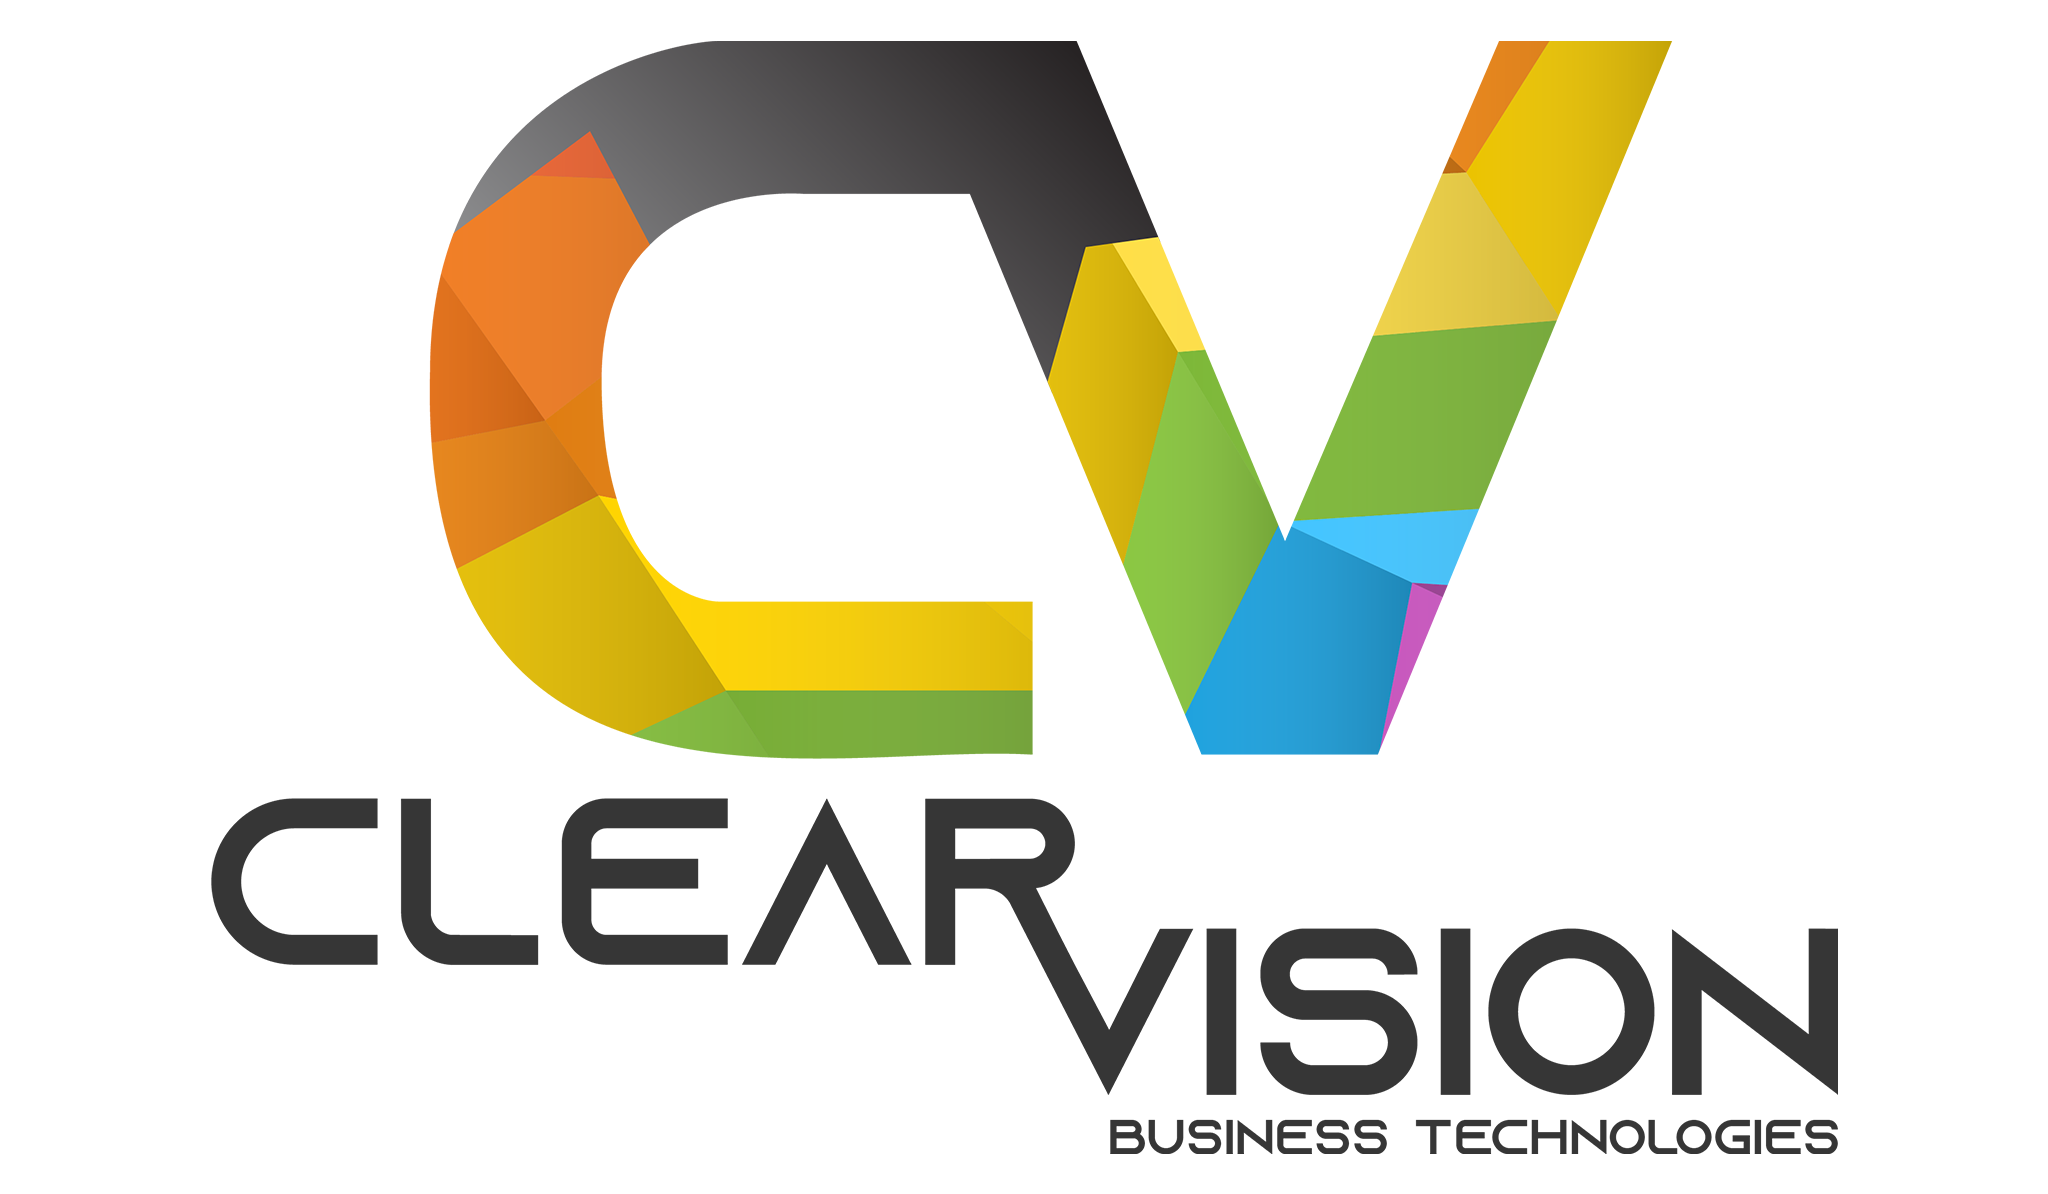 Clear Vision Business Technologies